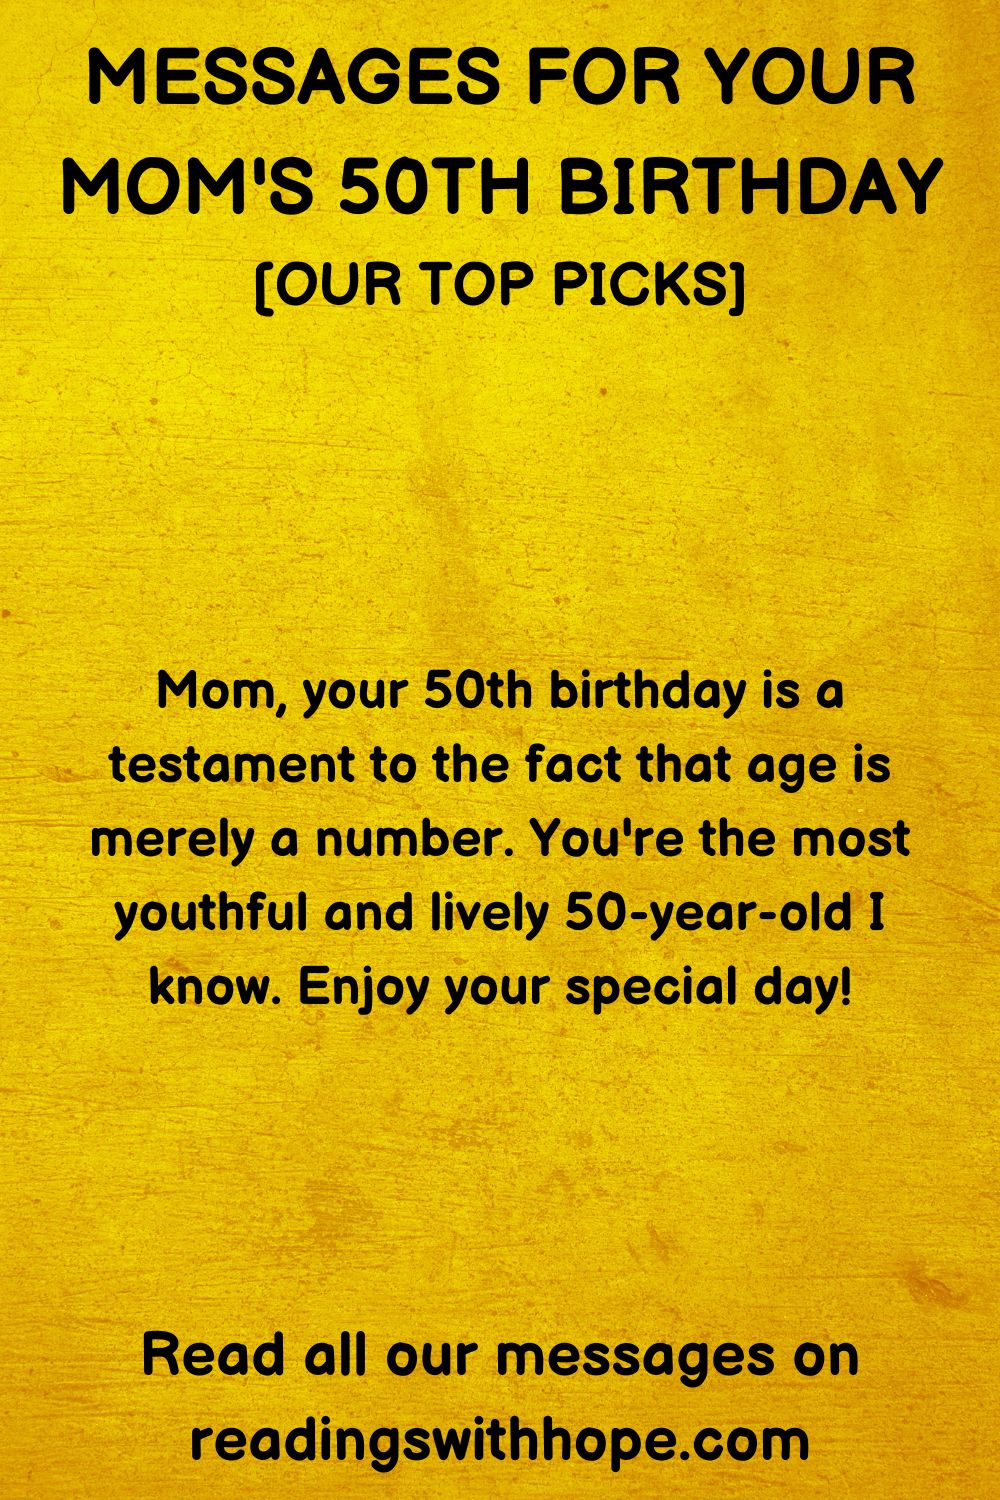 messages for your mom's 50th birthday